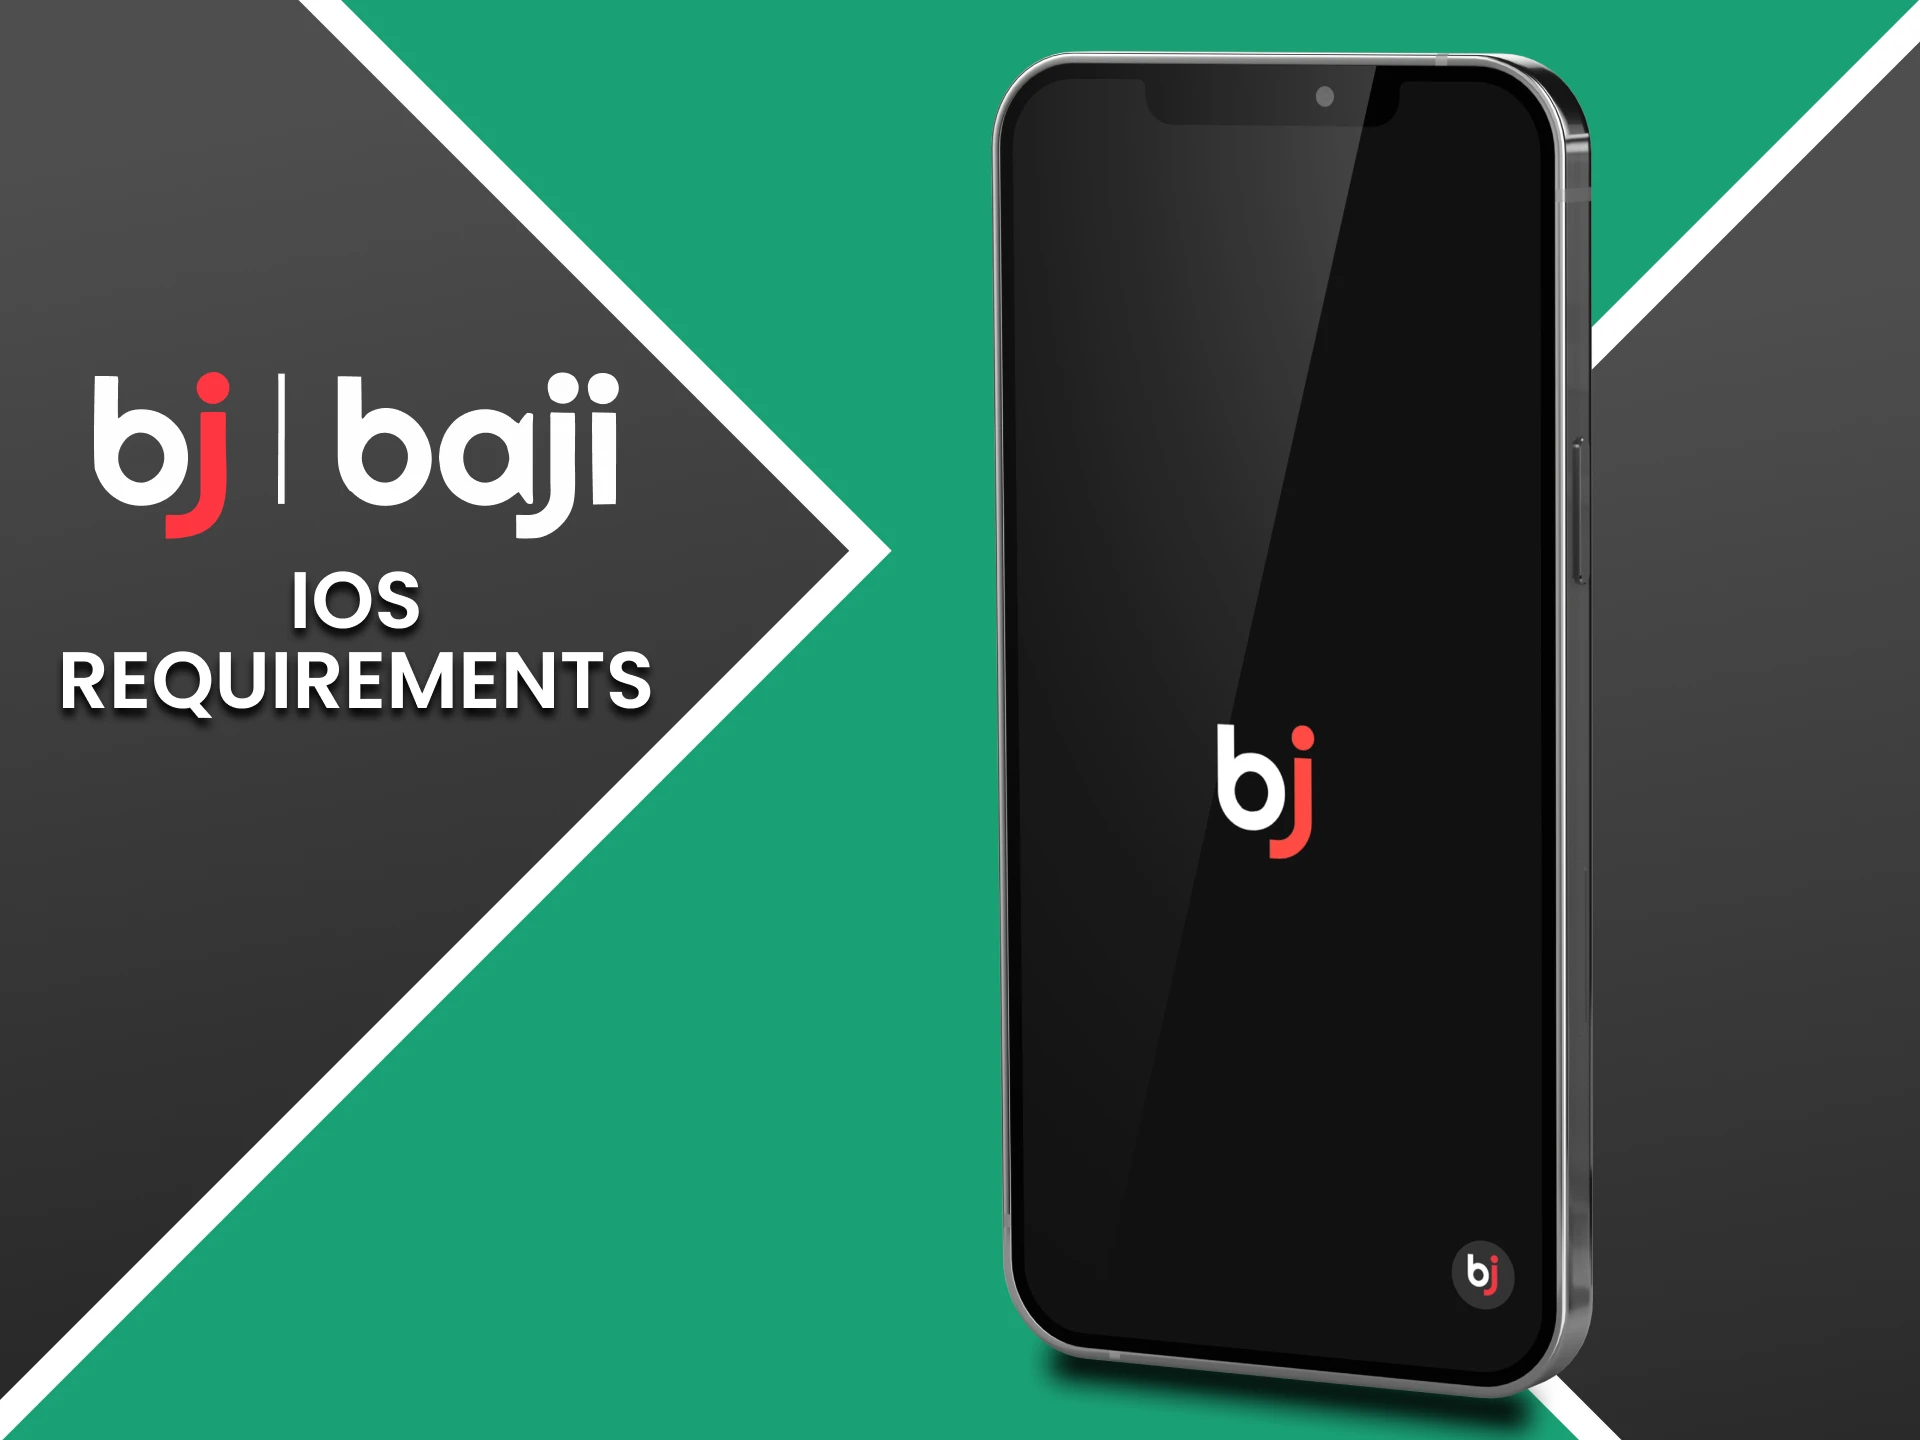 We will cover the requirements for the Baji app for iPhone and iPad on the iOS.